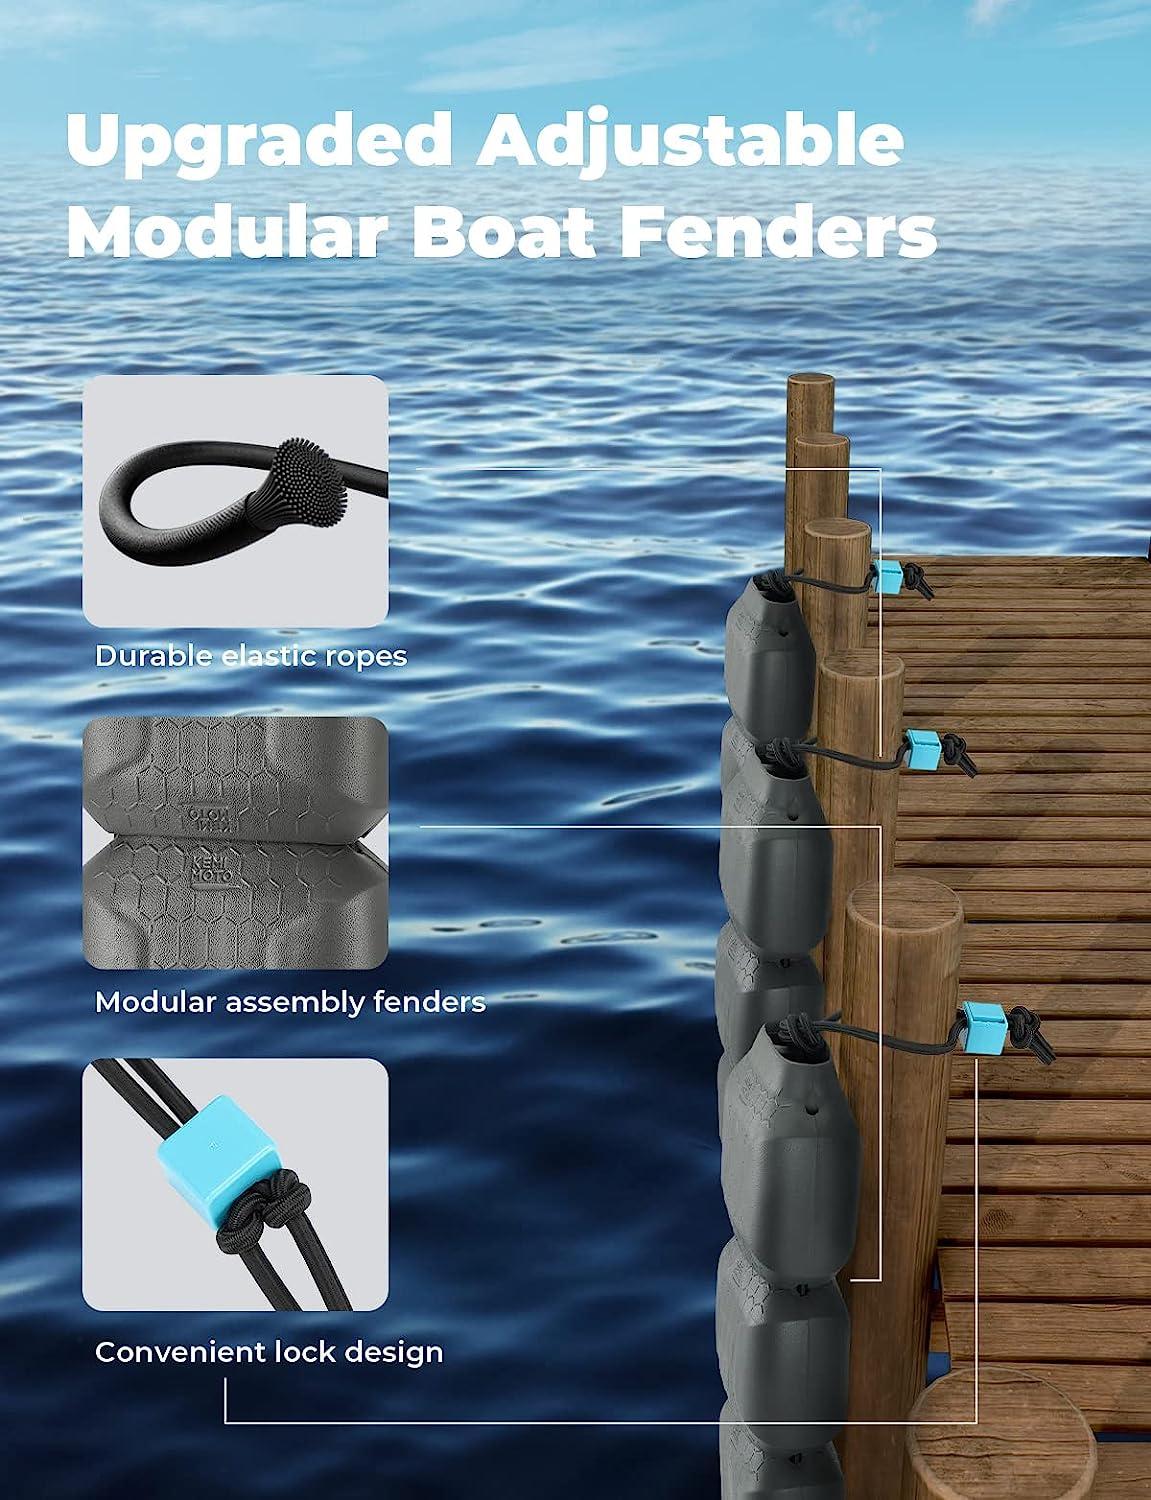 kemimoto Boat Fenders, Boat Bumpers for Docking with Rope, Upgraded  Adjustable Modular Fenders, Boat Fenders for Docking with Rope, Boat  Accessories for Bass Boat, Jon Boats, Dock, etc 3 Blocks